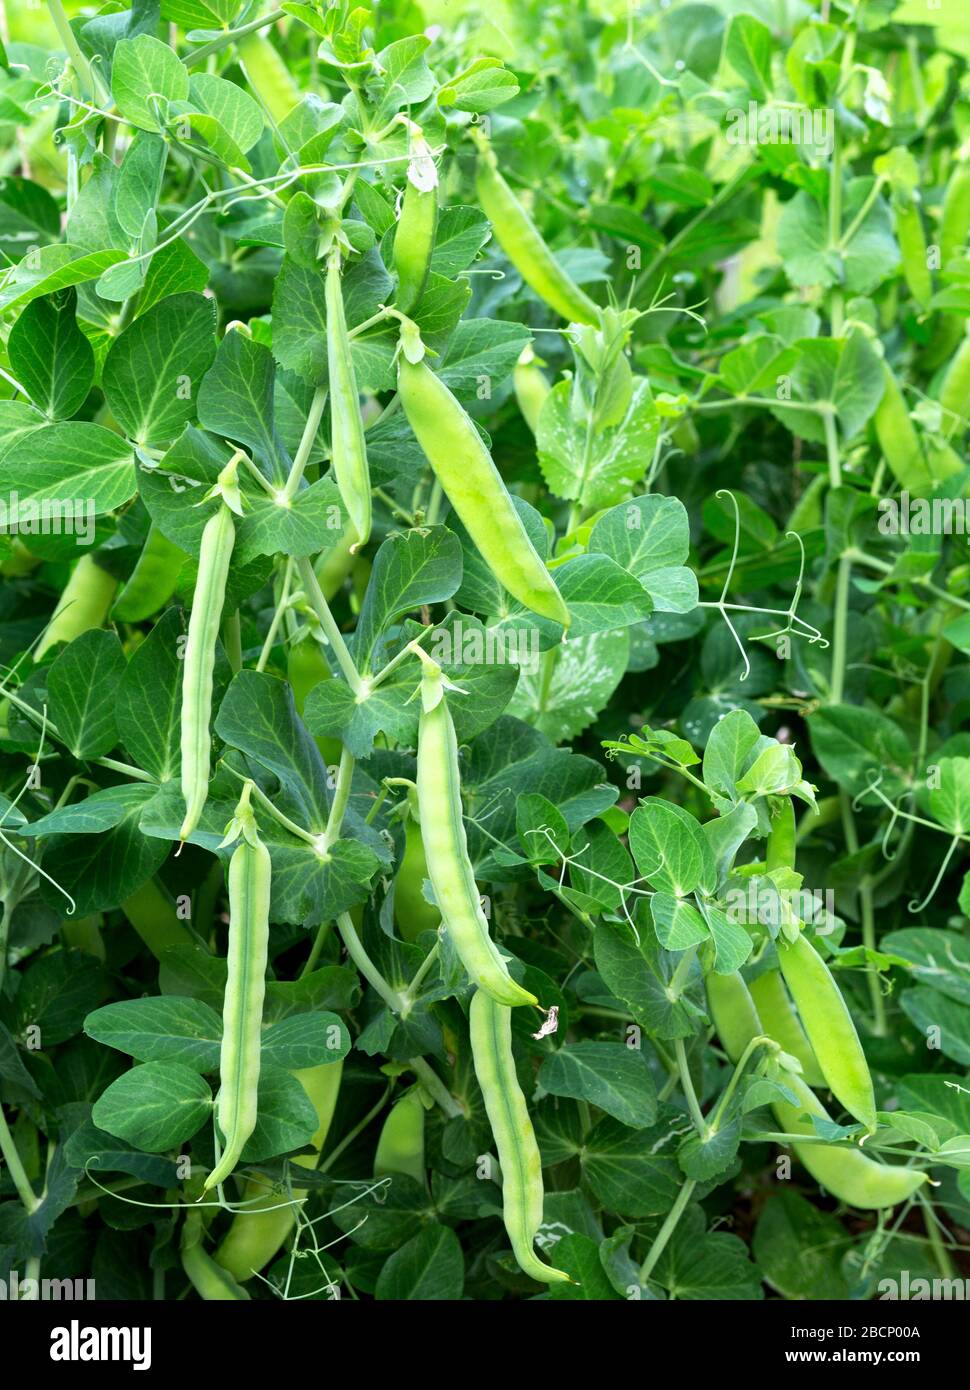 Peas plant growing on the farm. Pods of young green peas. Sweet Pea (pisum sativum). Stock Photo